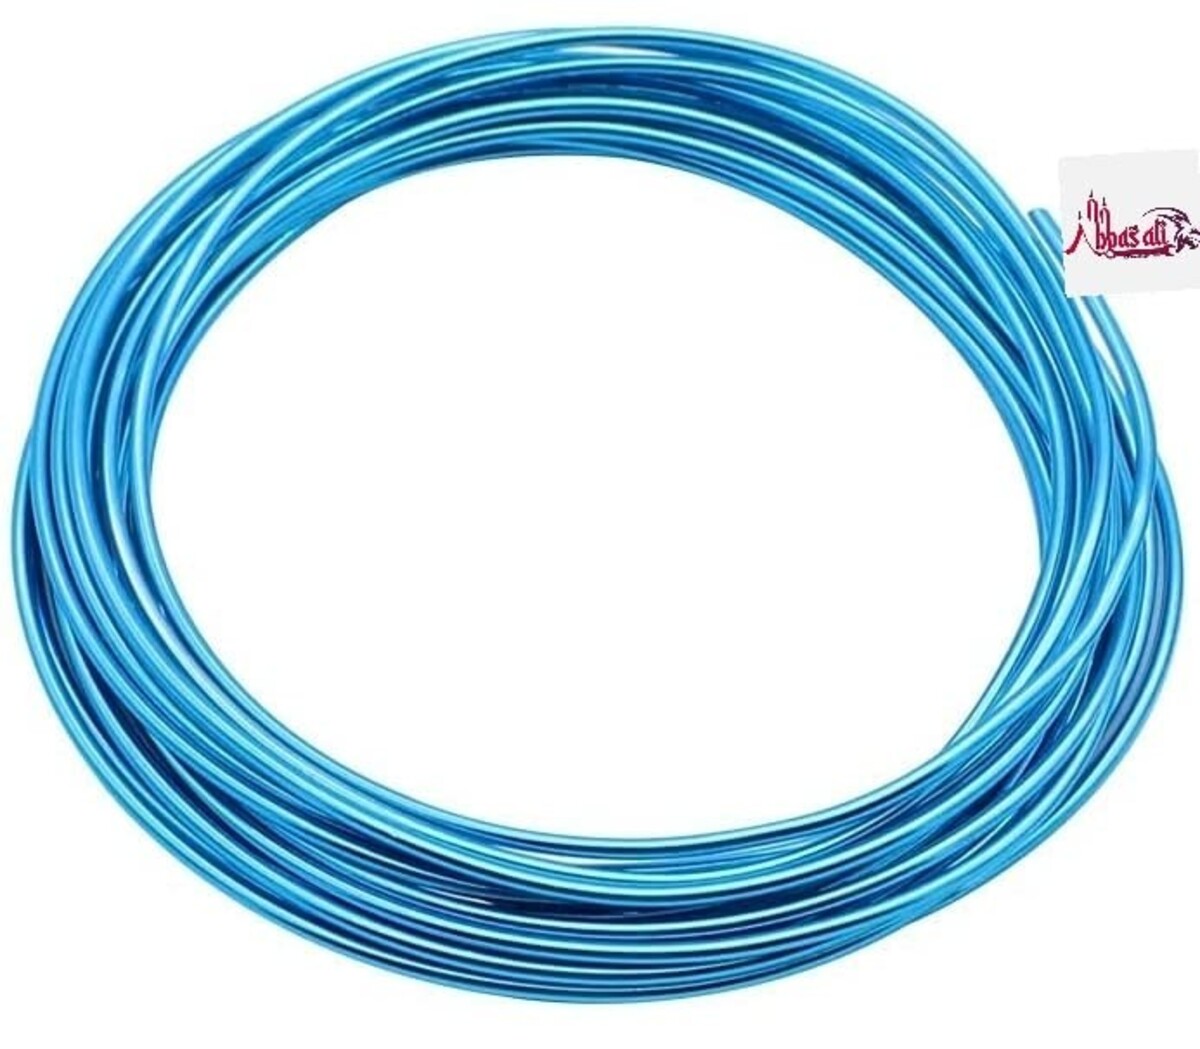 ABBASALI Beading Wire 2mm x 5m Flexible Craft Wire Anodized 6